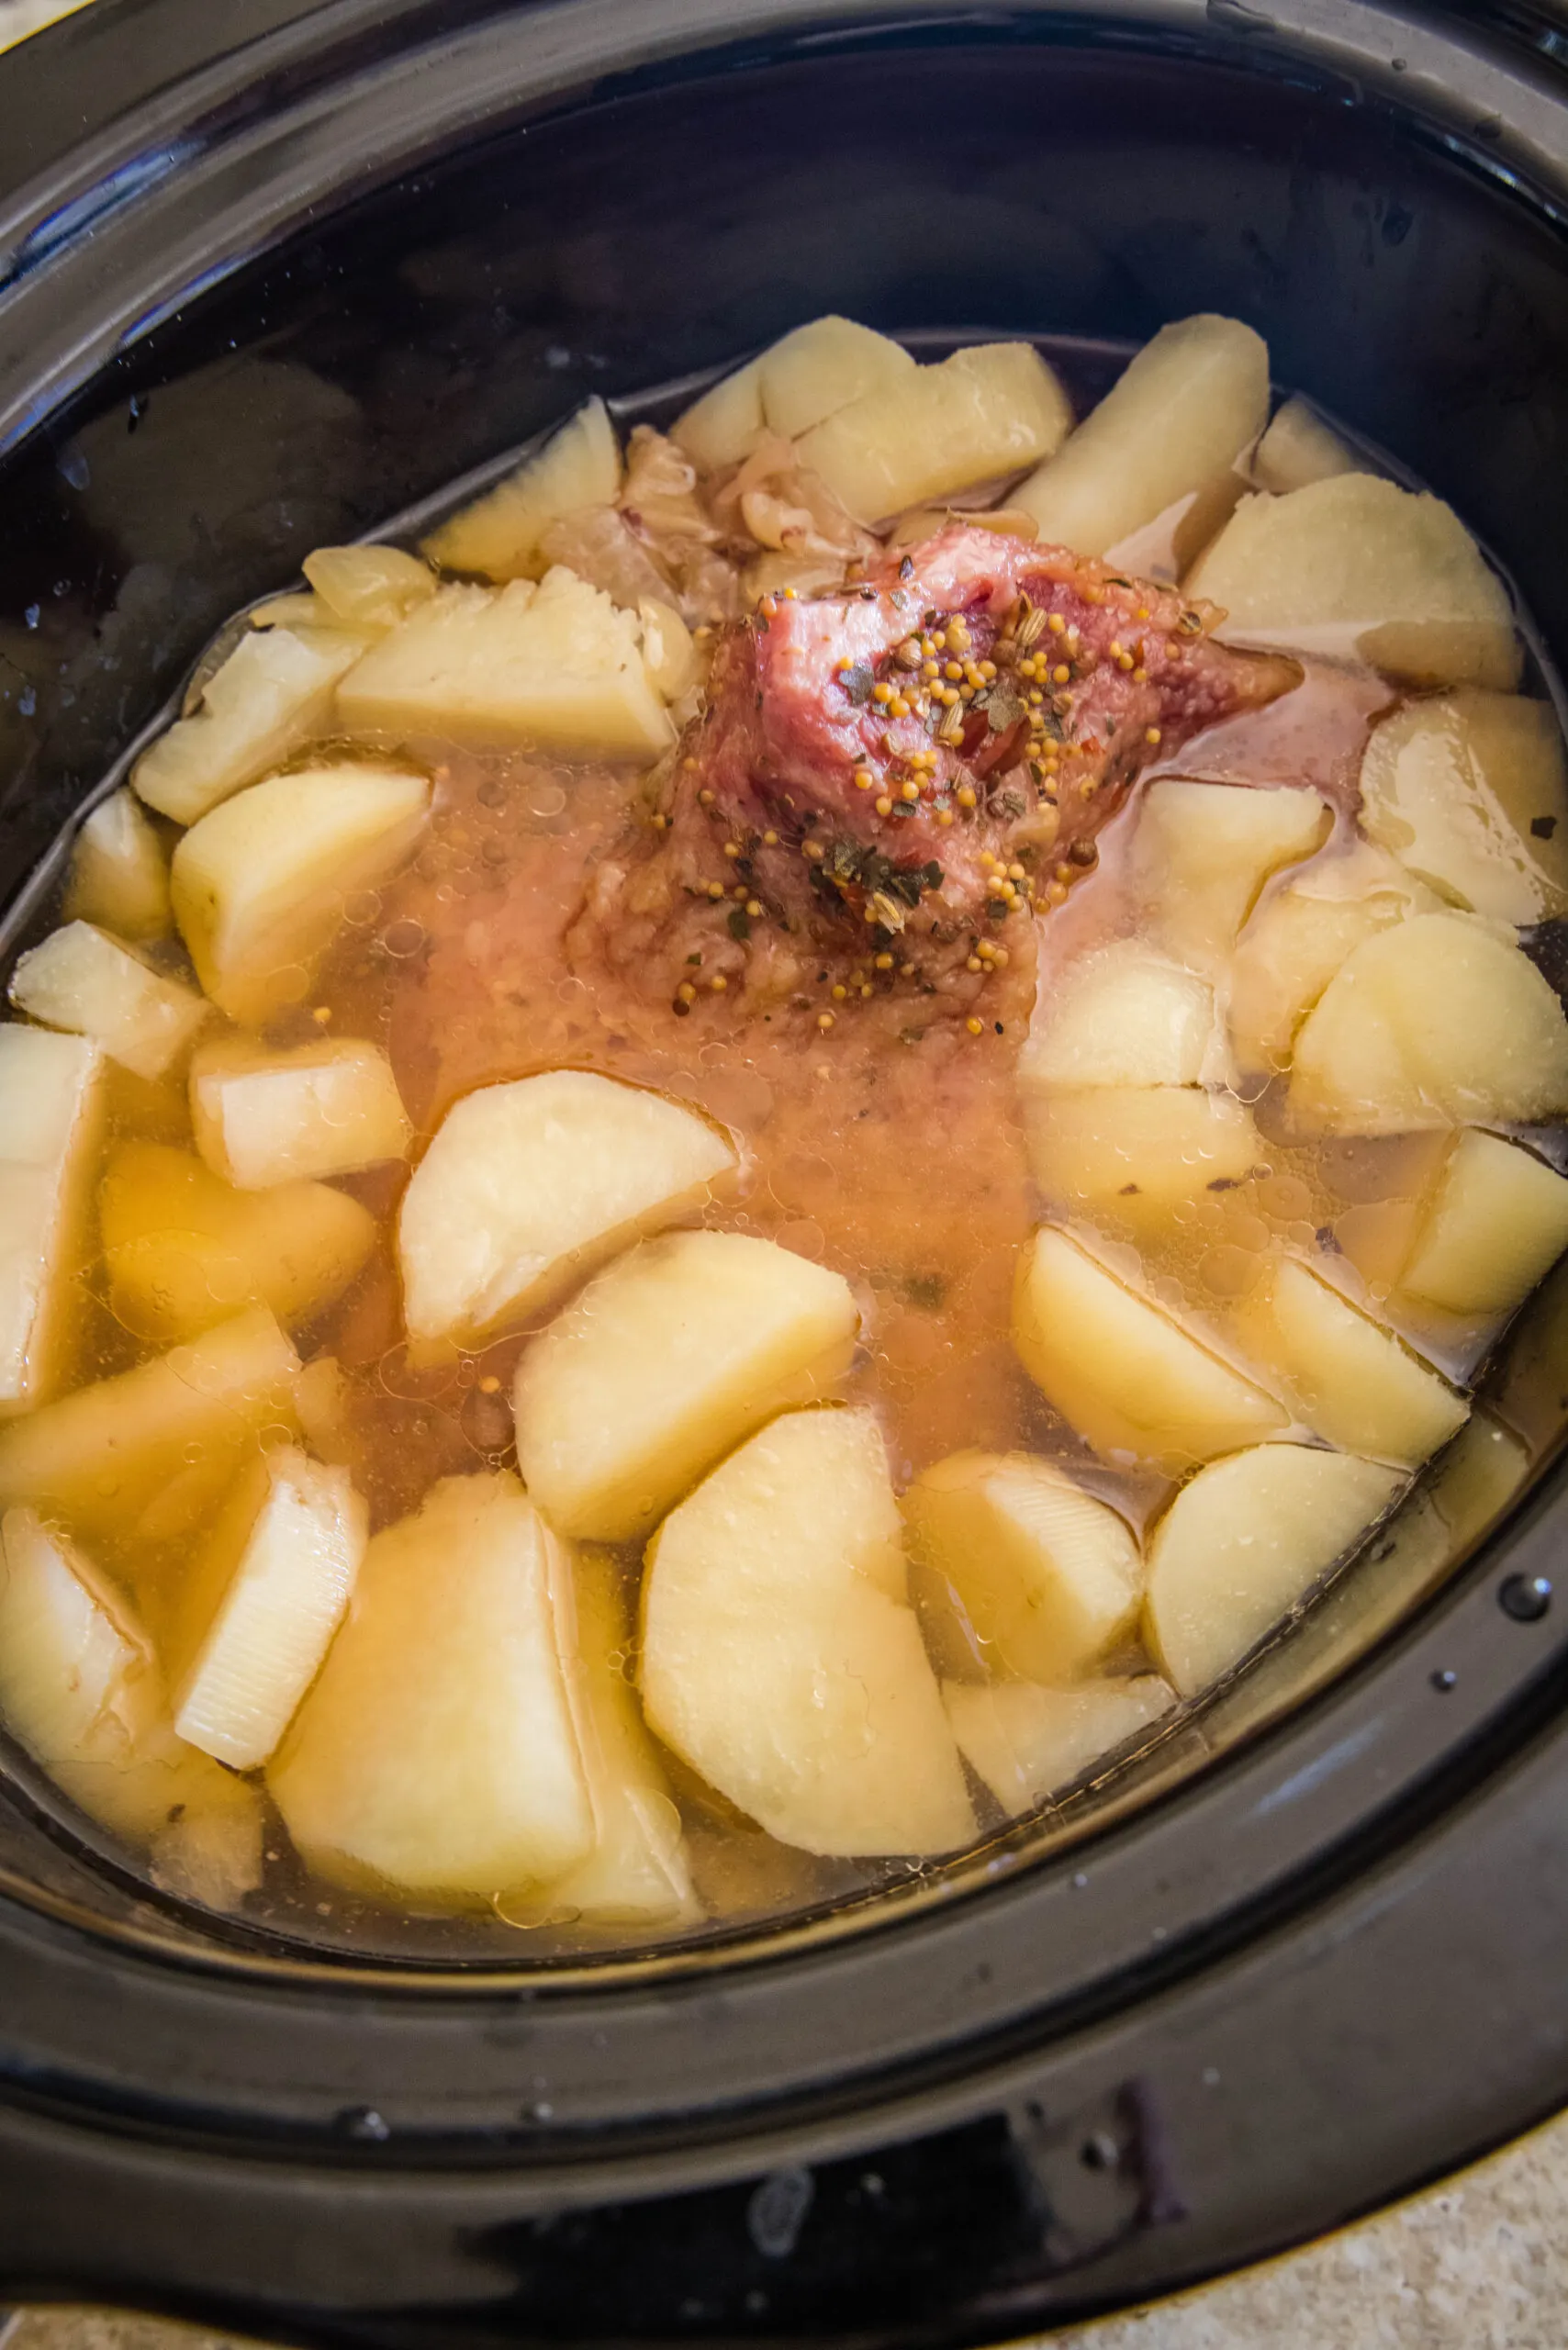 Cooked corned beef, onions, and potatoes inside the slow cooker.